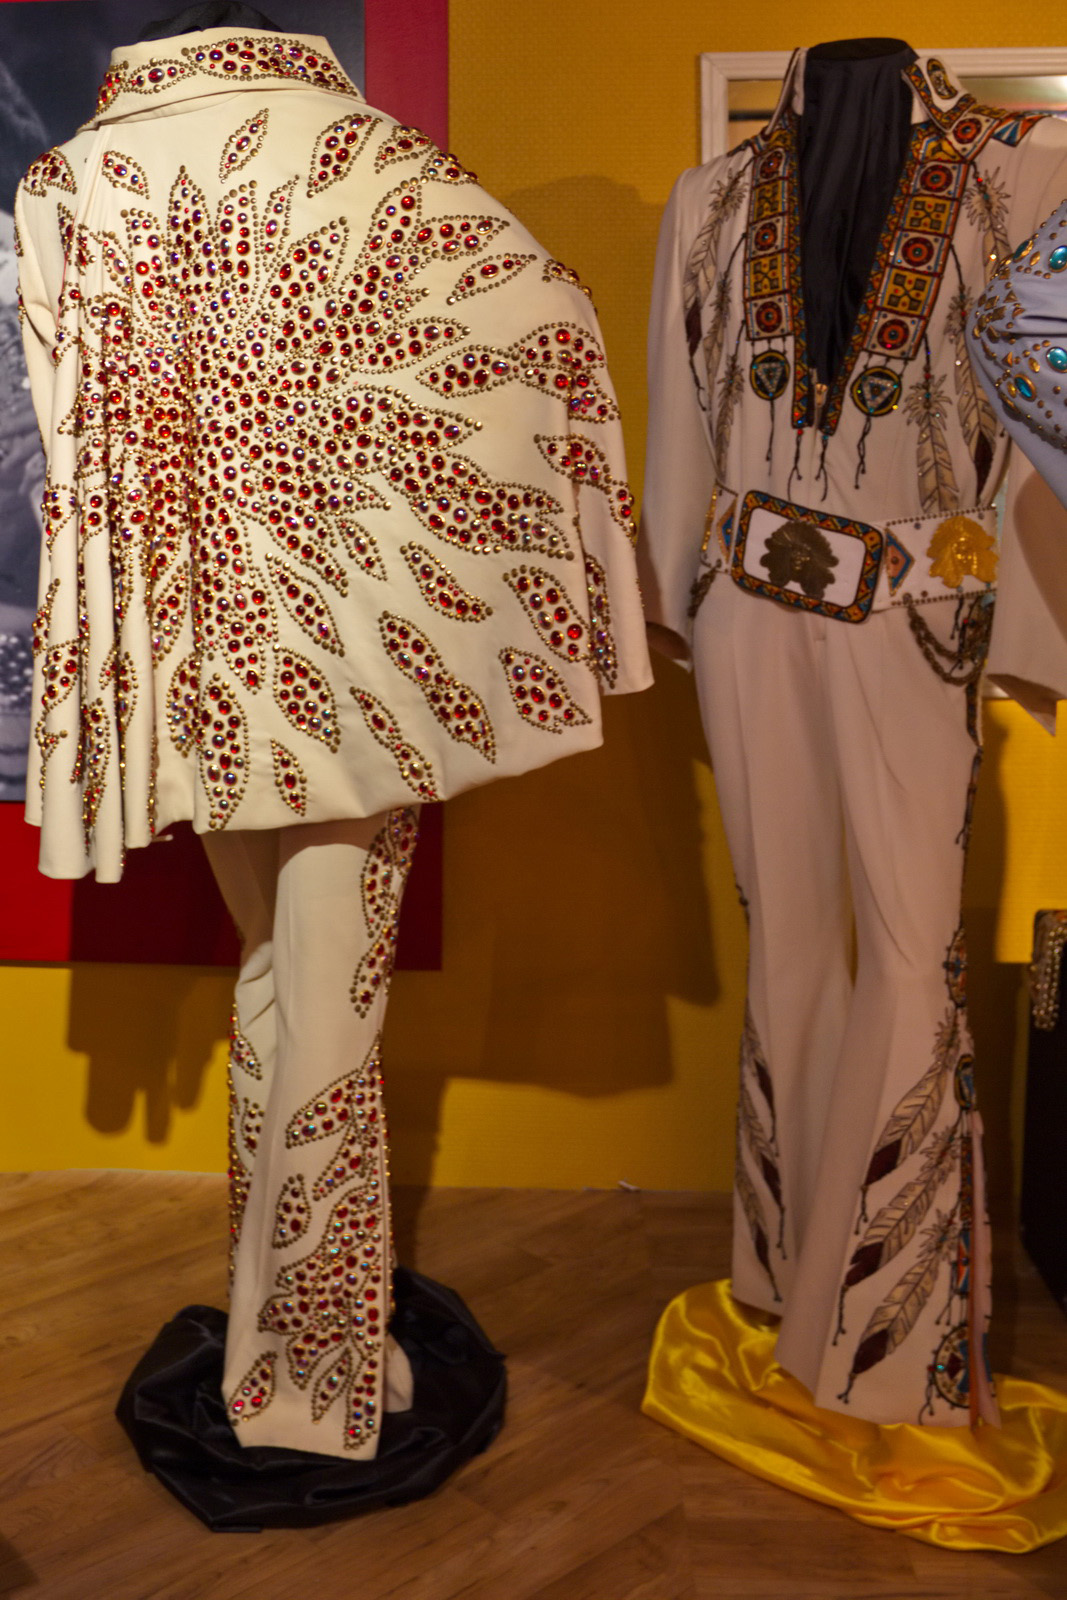 Elvis costumes must have been heavy, many to see on display at Graceland.